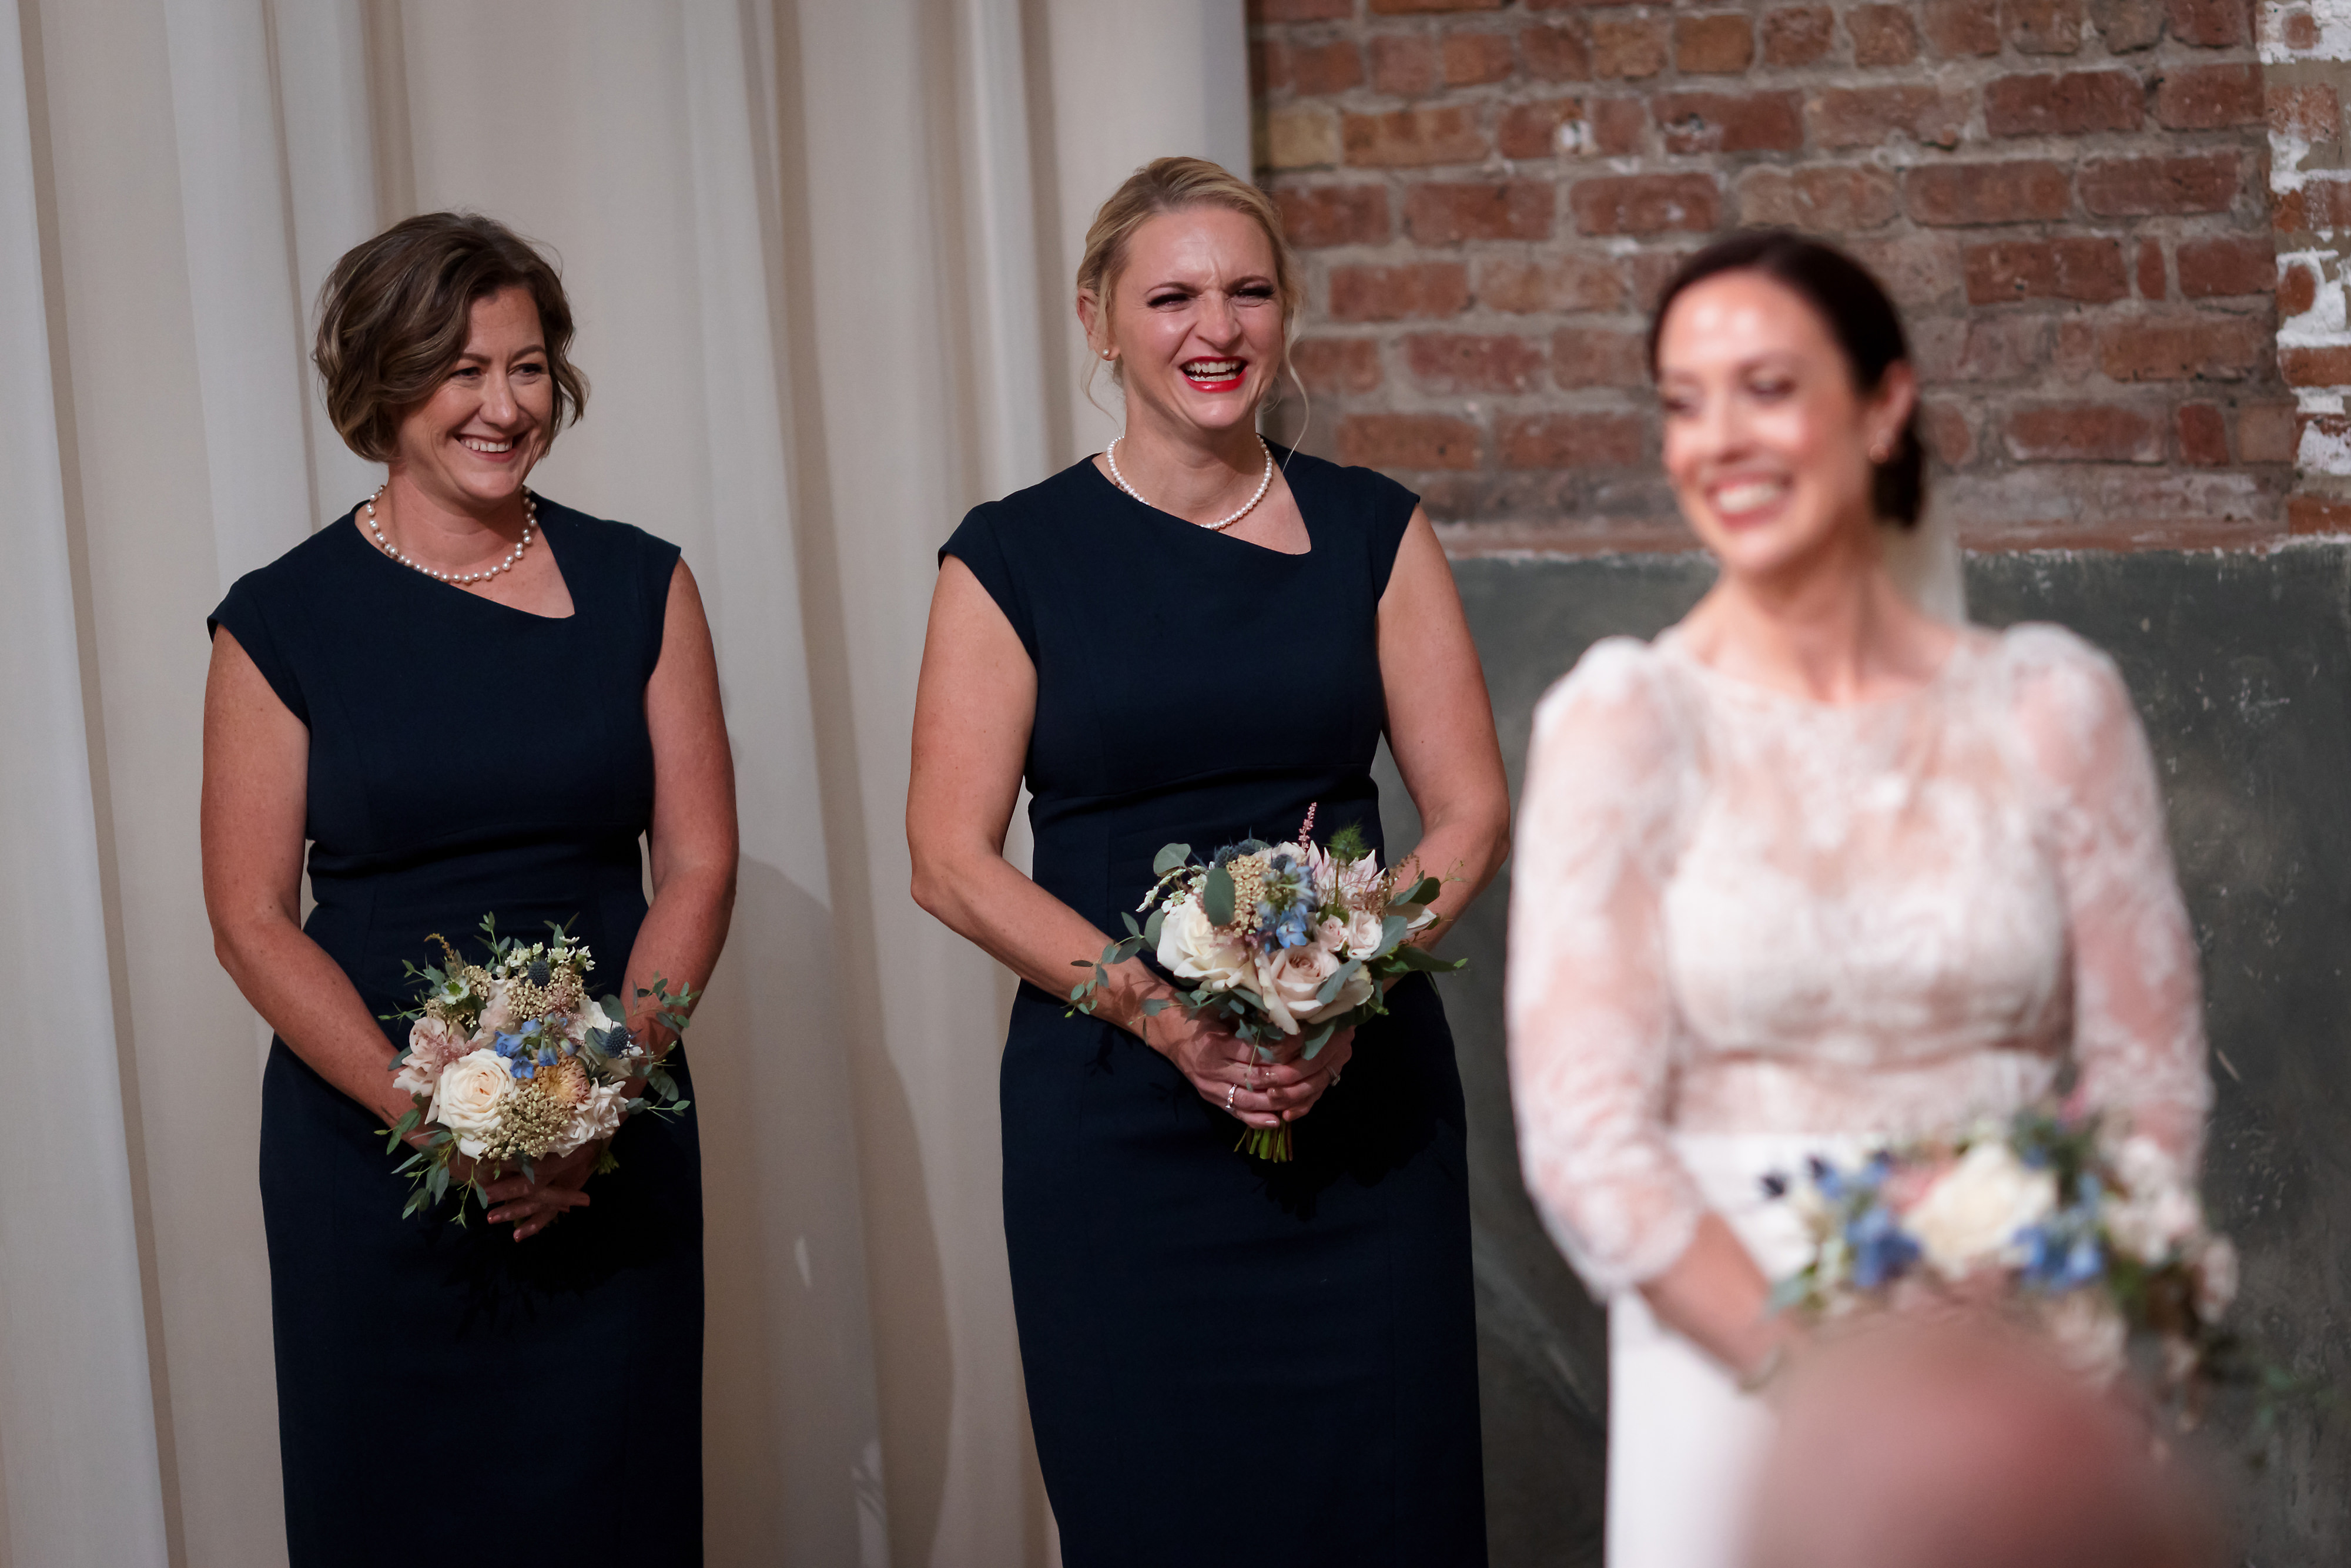 Bridesmaids laugh during wedding ceremony at The Fairlie